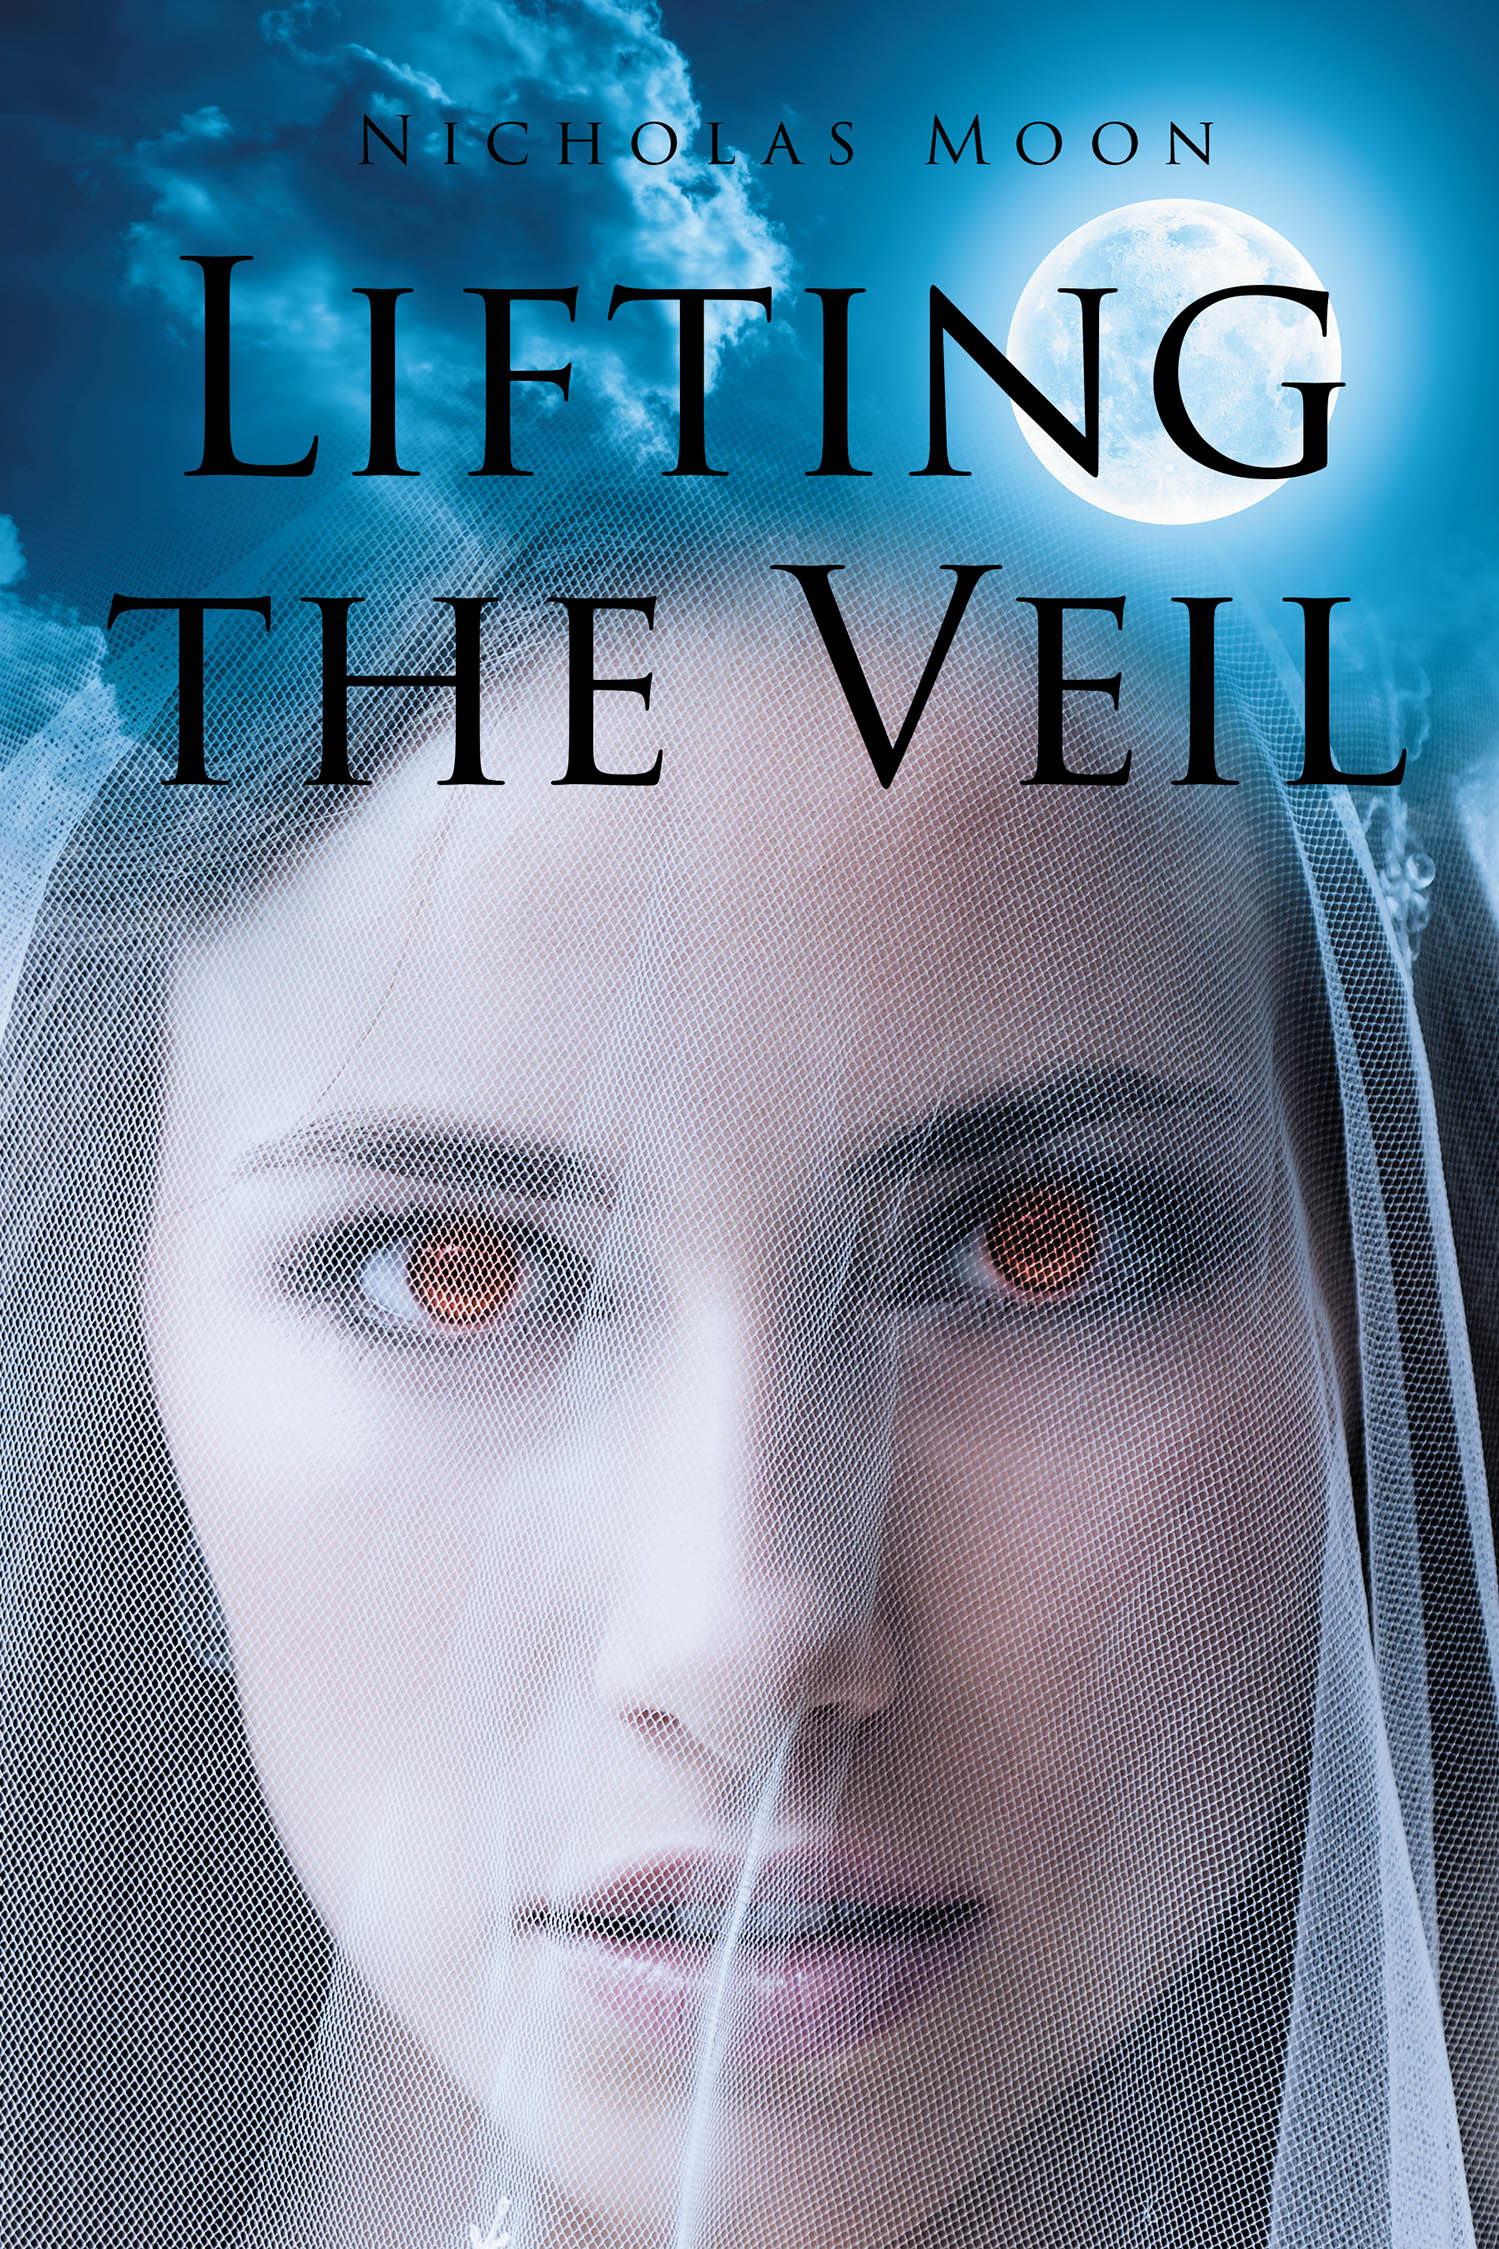 Author Nicholas Moon’s New Book, "Lifting the Veil," is a Compelling Novel That Invites Readers Into a Captivating Exploration of Existentialism and the Paranormal